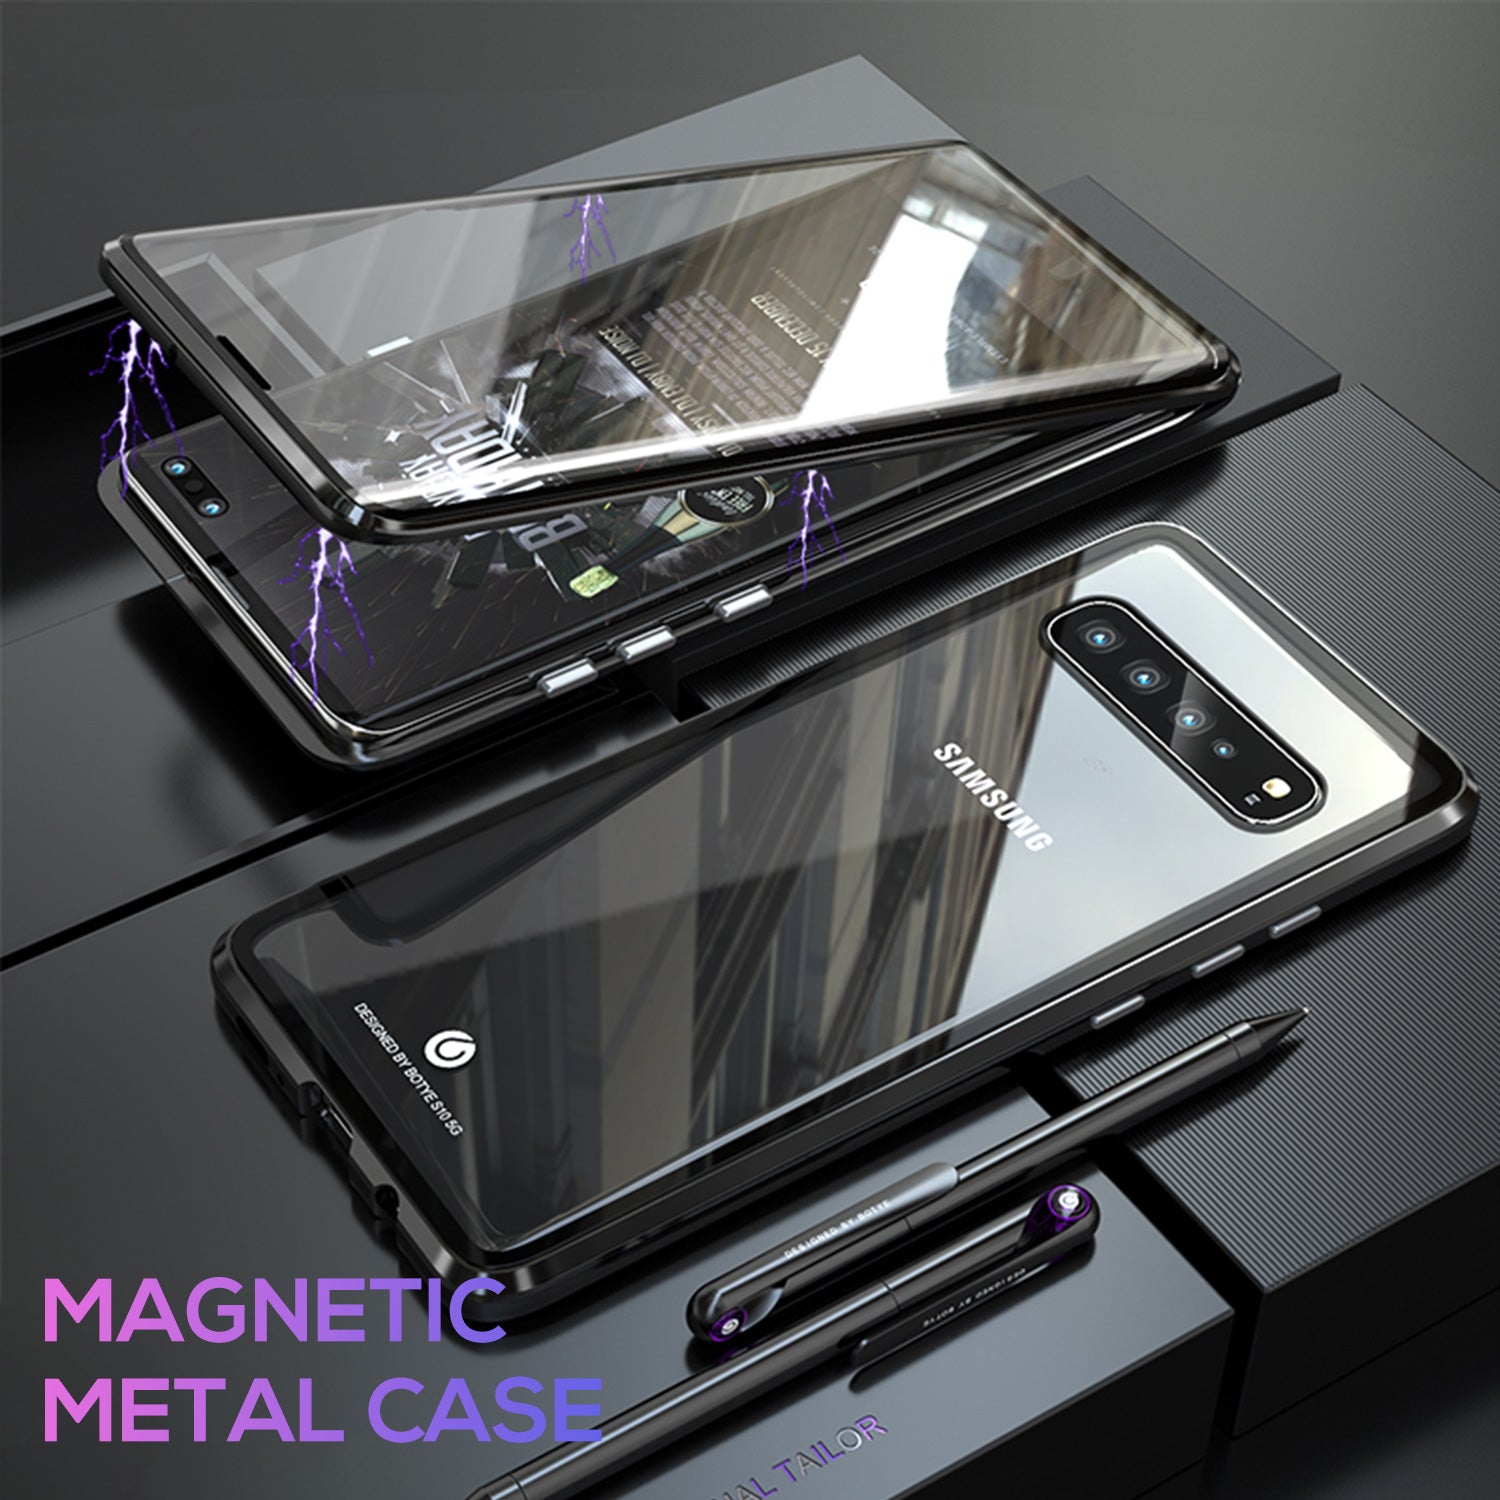 For Galaxy S9 Magnetic Metal Tempered Glass Case Cover-Black, White, Red